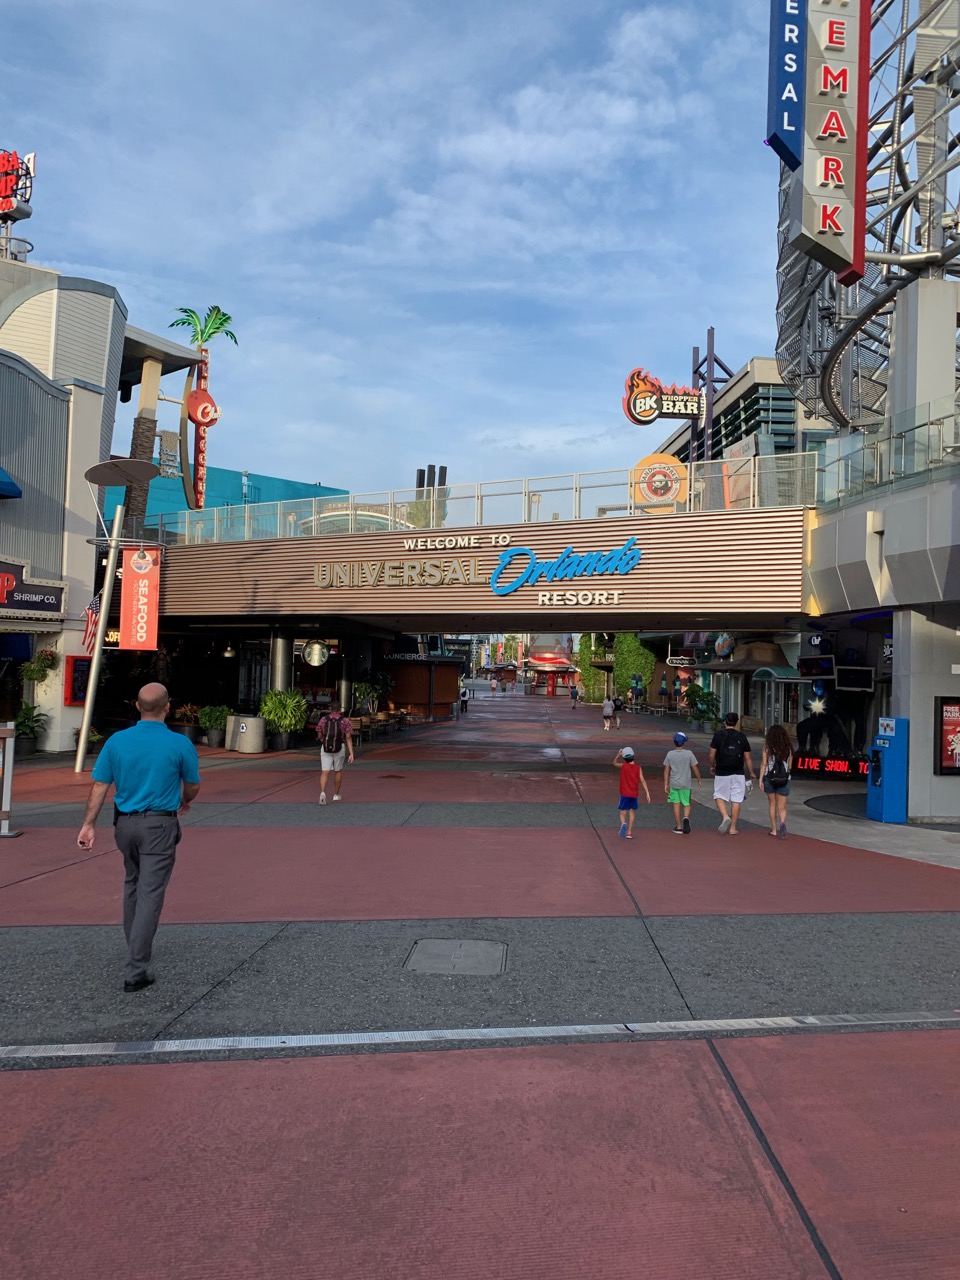 Universal Orlando Trip Planning Guide (2020) - Mouse Hacking